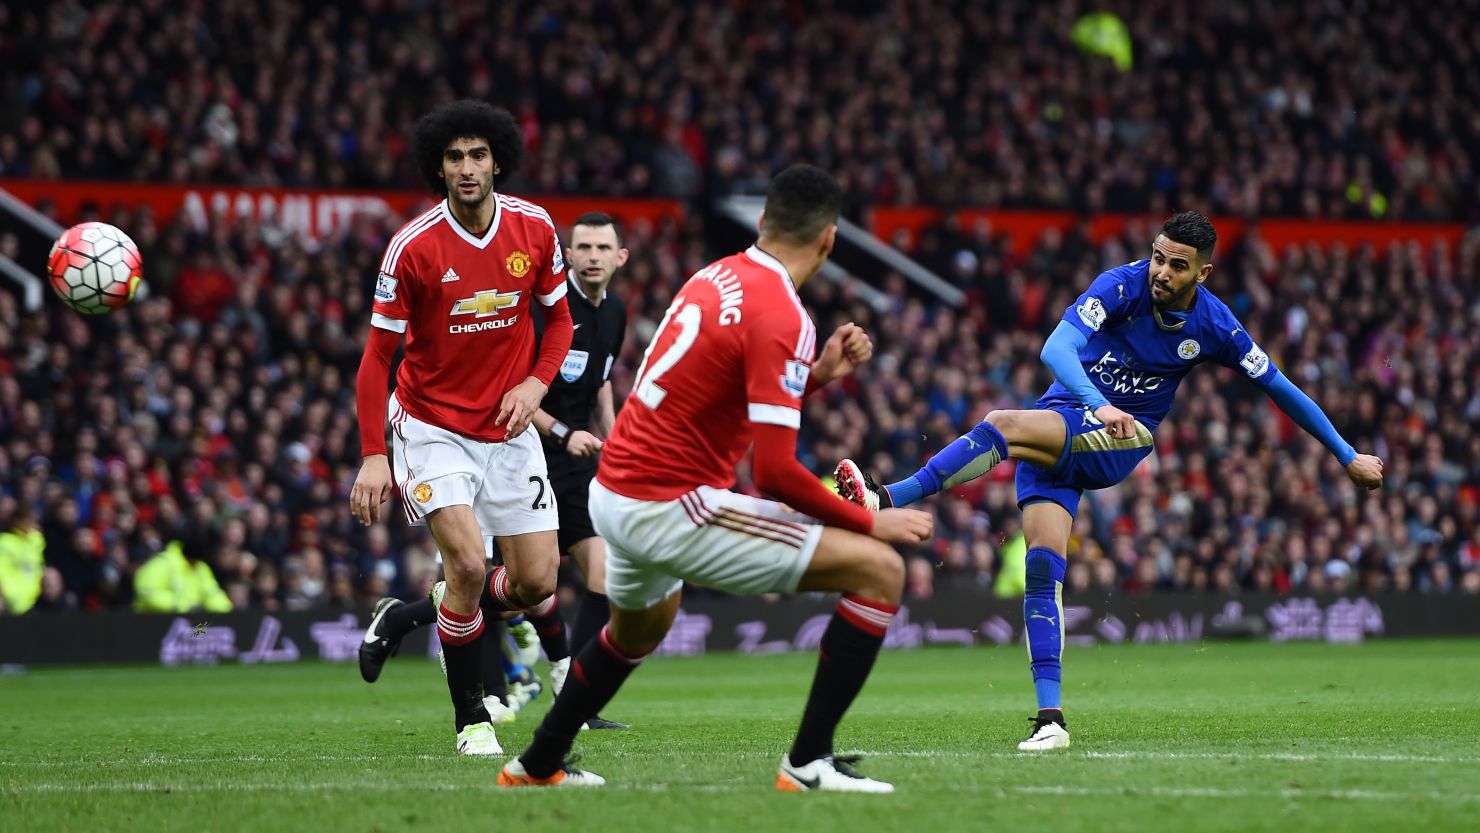 Leicester's player of the year Riyad Mahrez shoots against Manchester United.